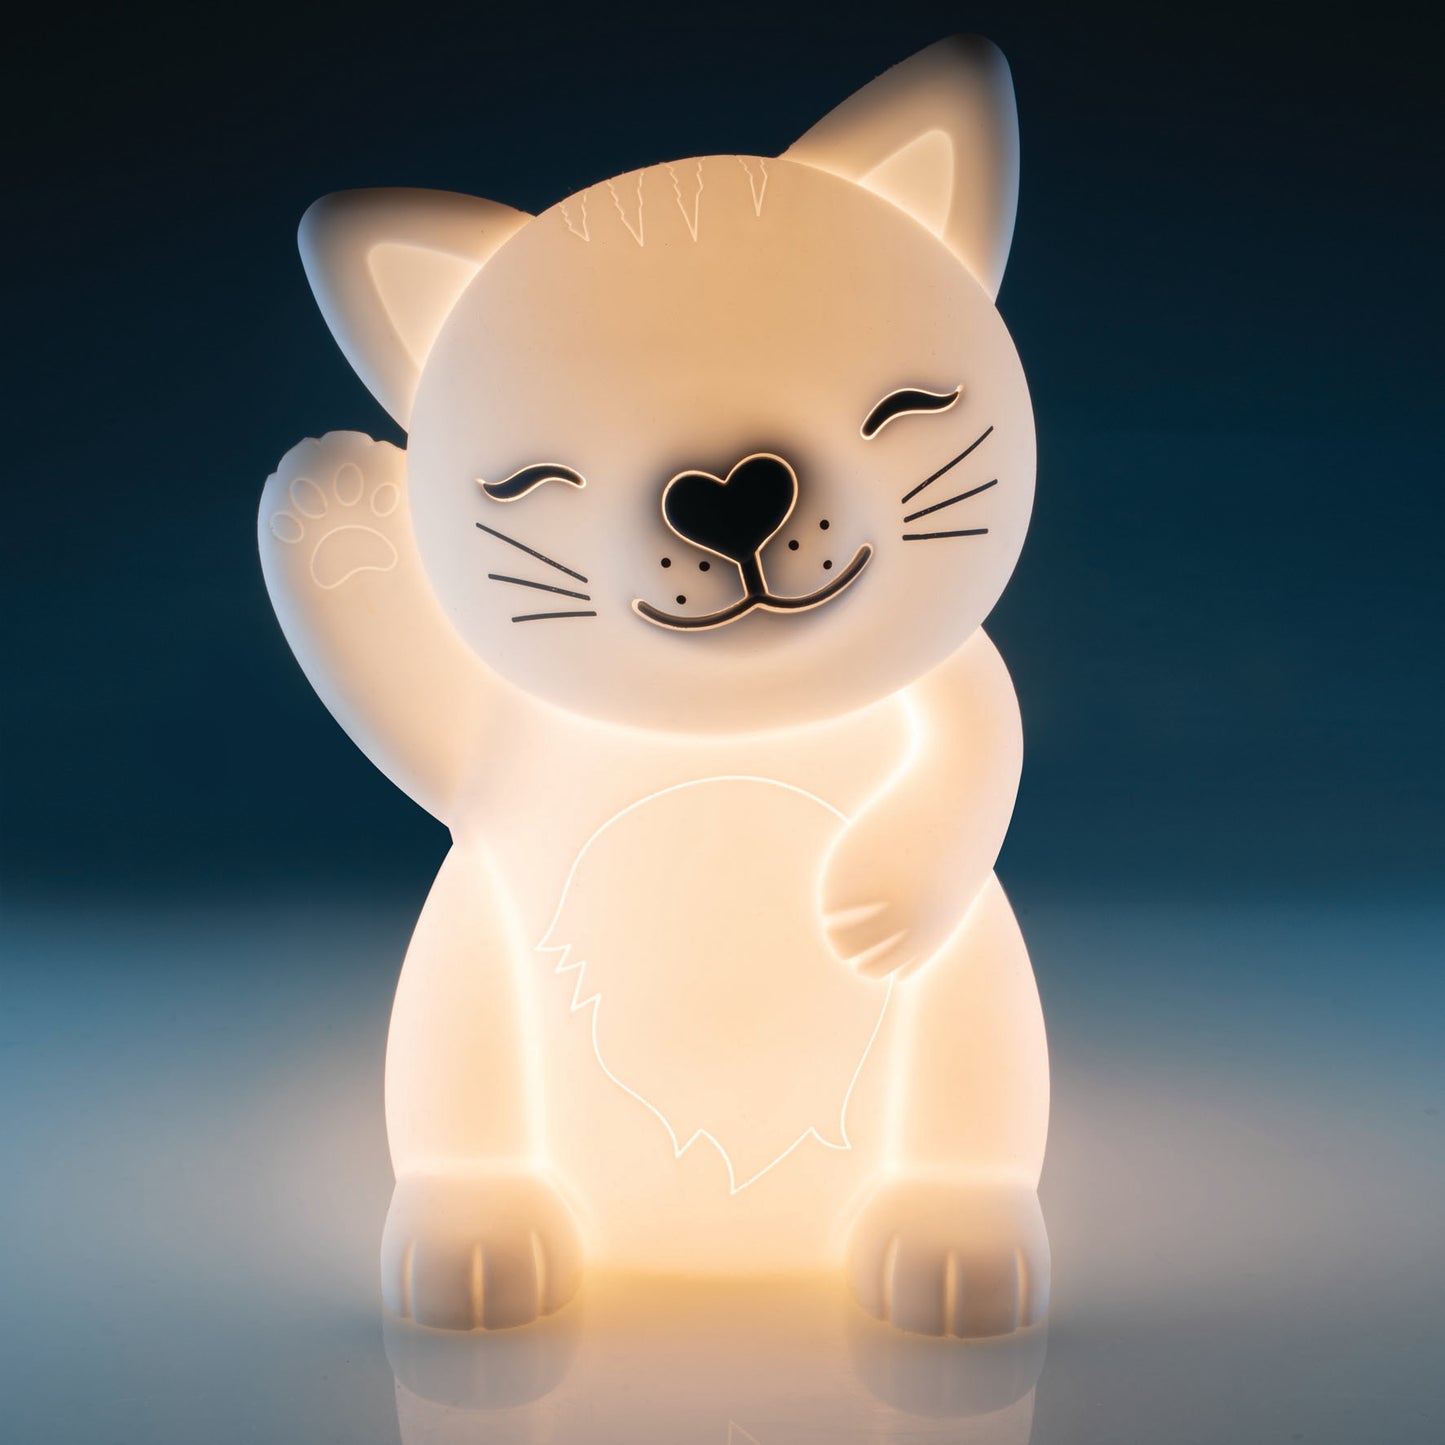 Cat Silicone Touch Lamp